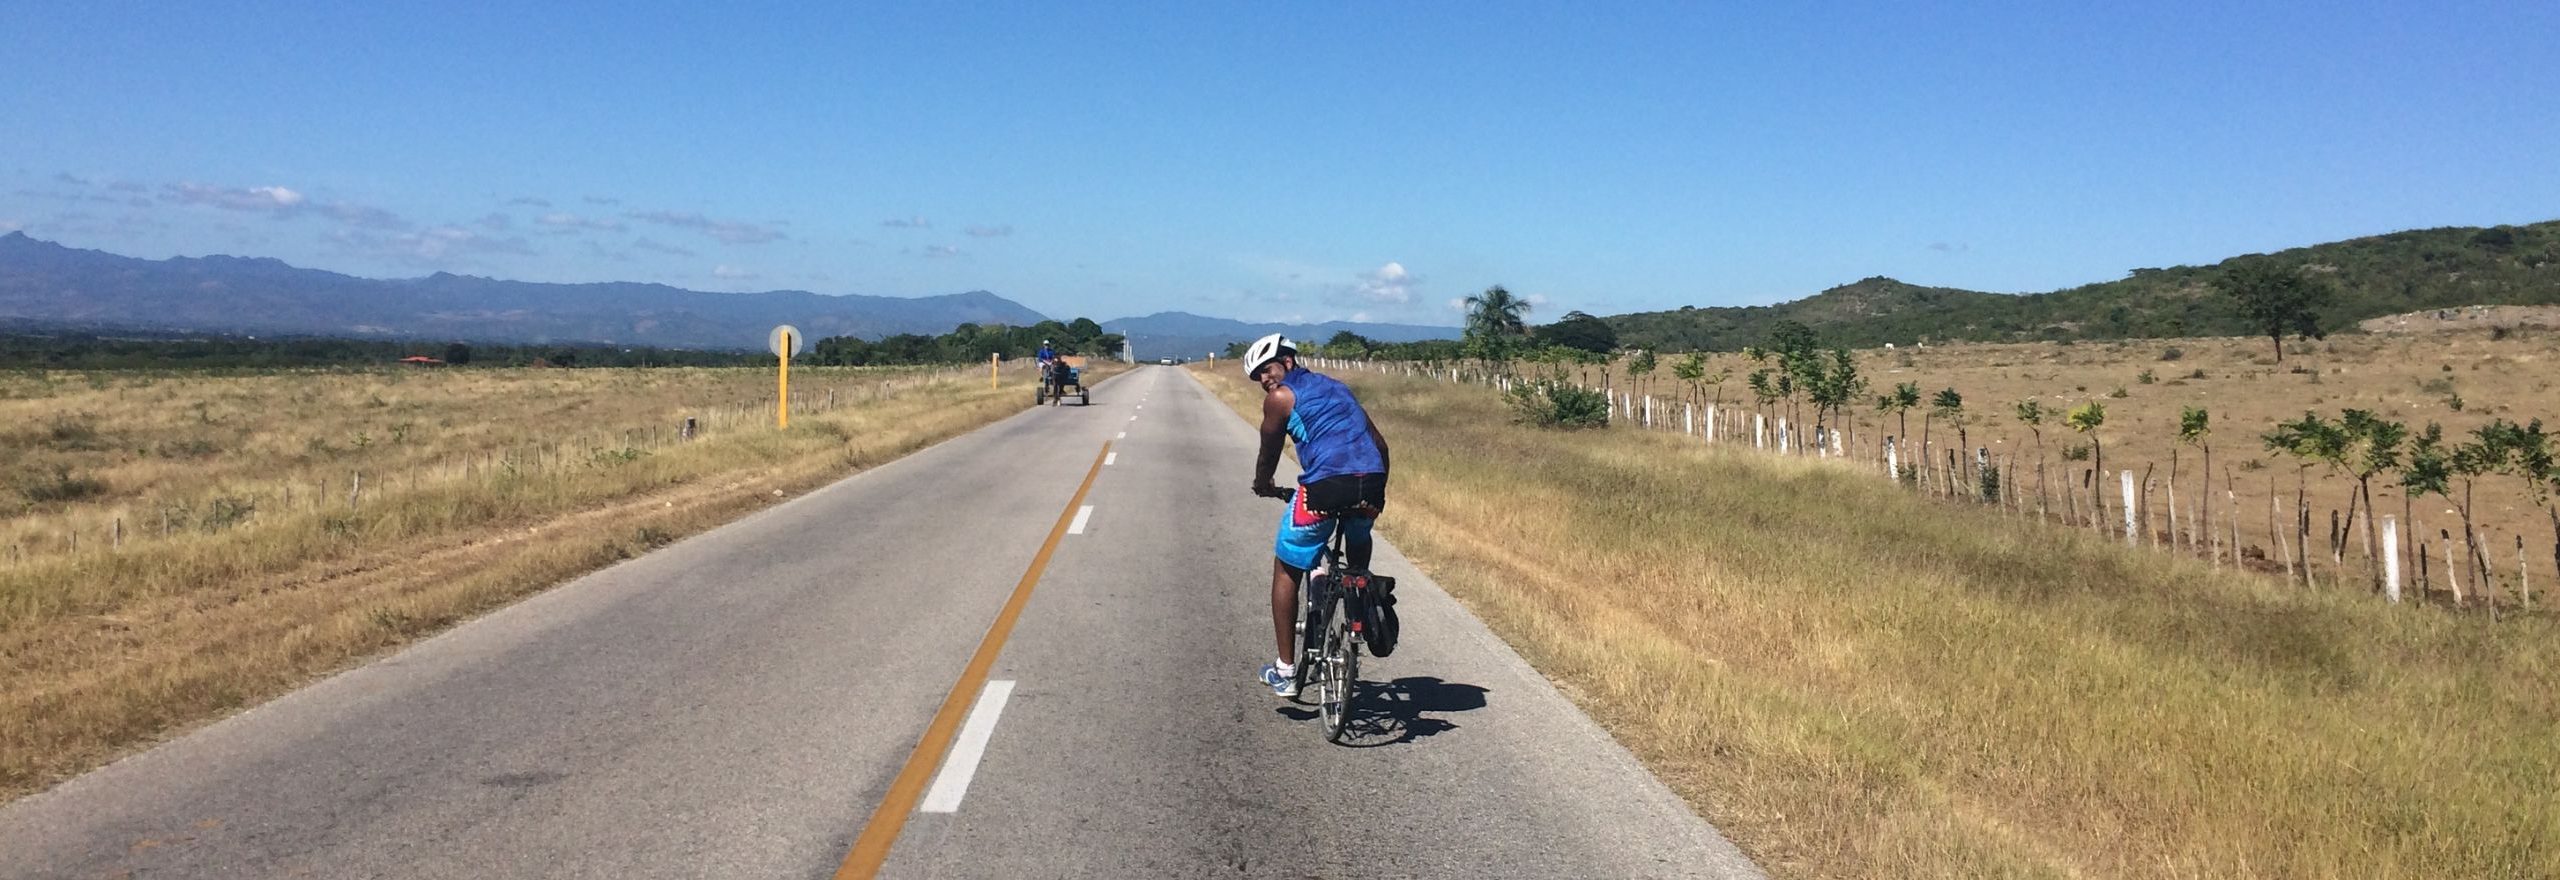 Cycling the country roads of Cuba